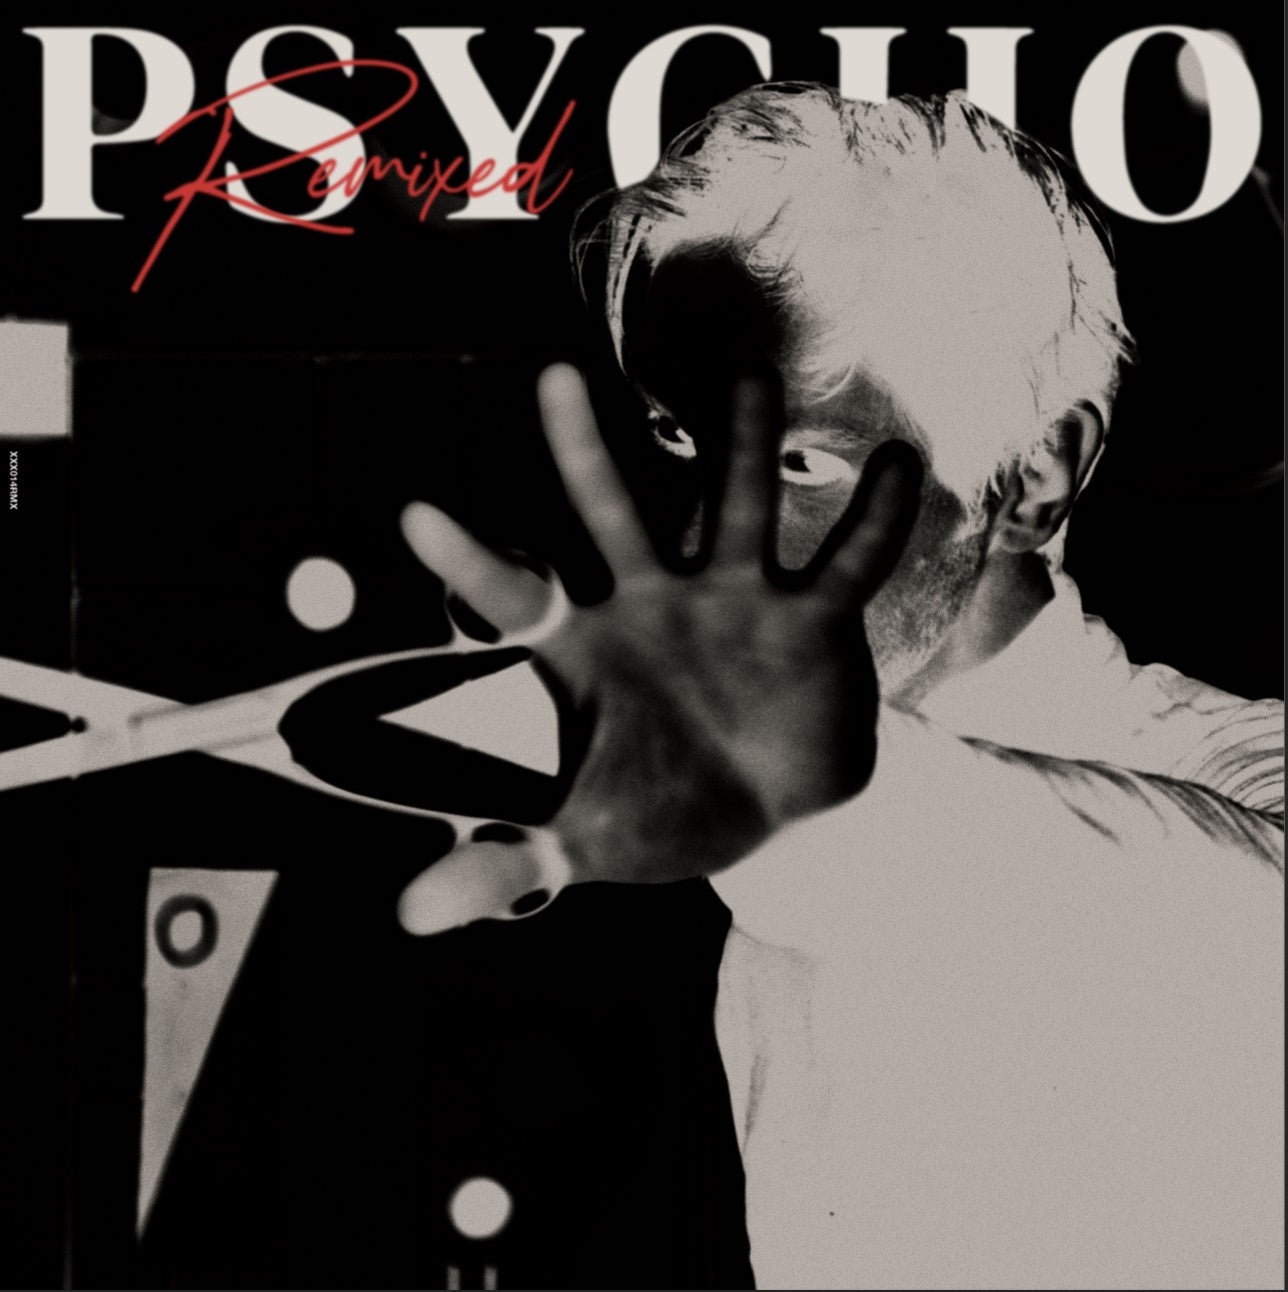 Isaie – Psycho remixed